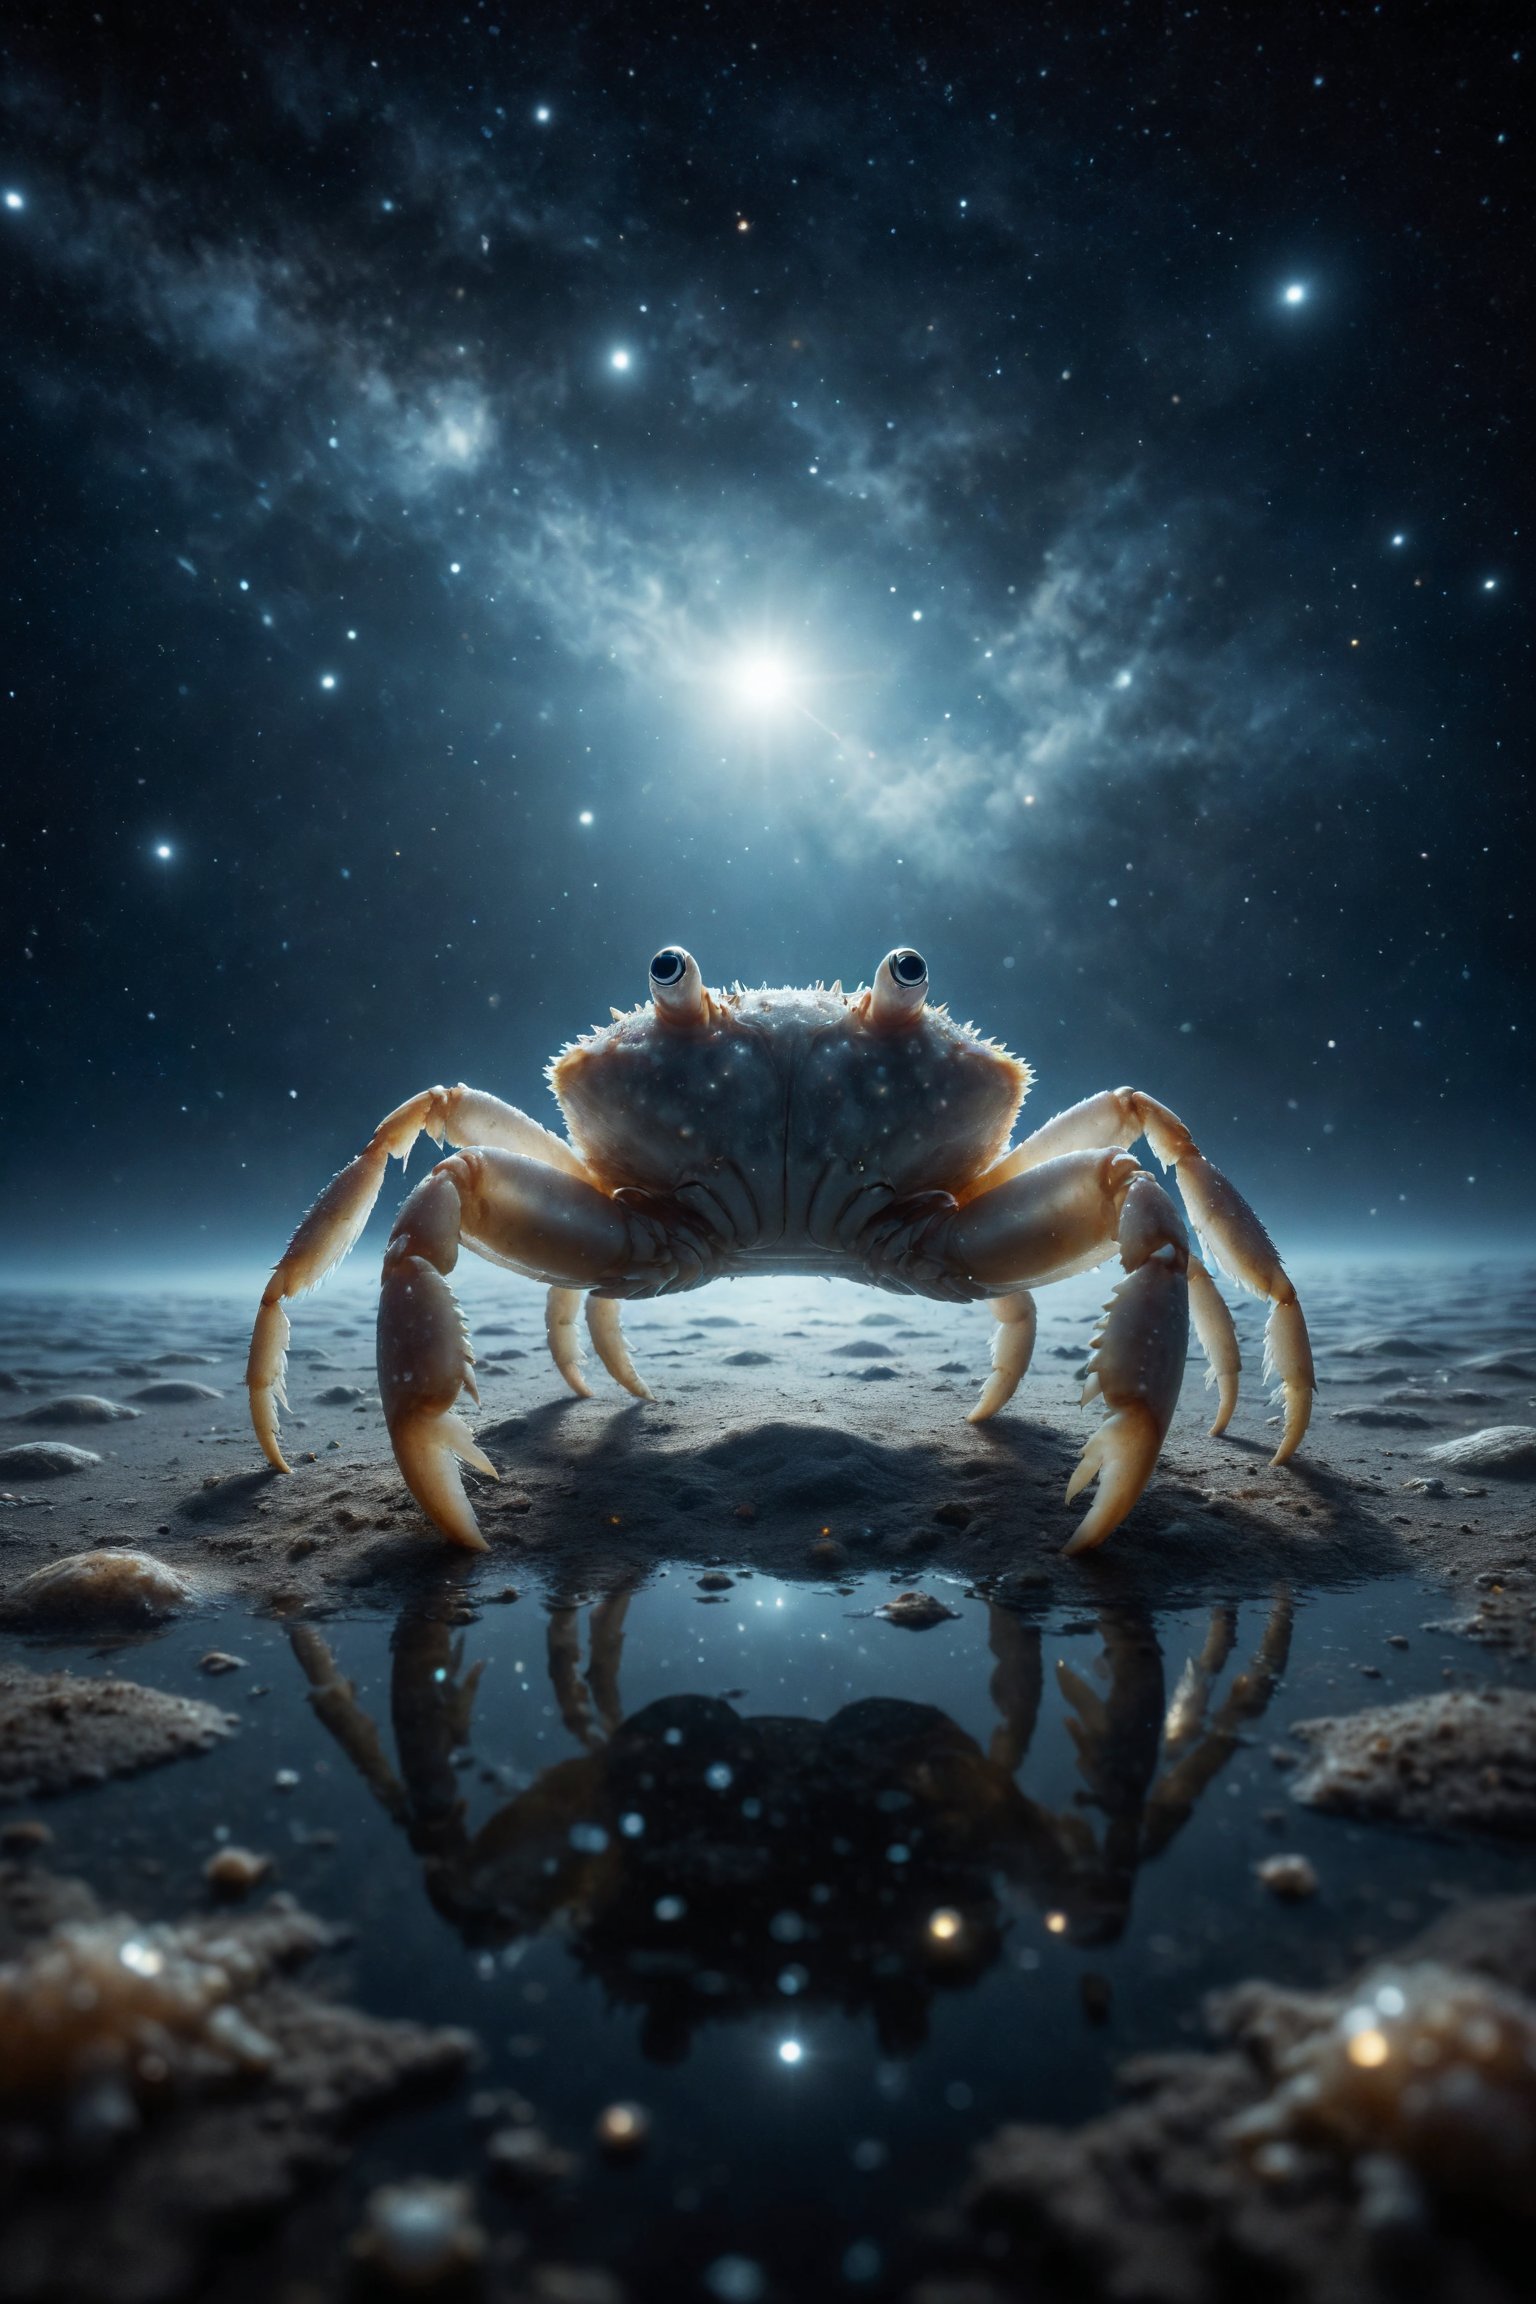 A pearl crab walking on the surface of a starry ocean, under a starry sky with constellations reflecting in the crystal-clear water.